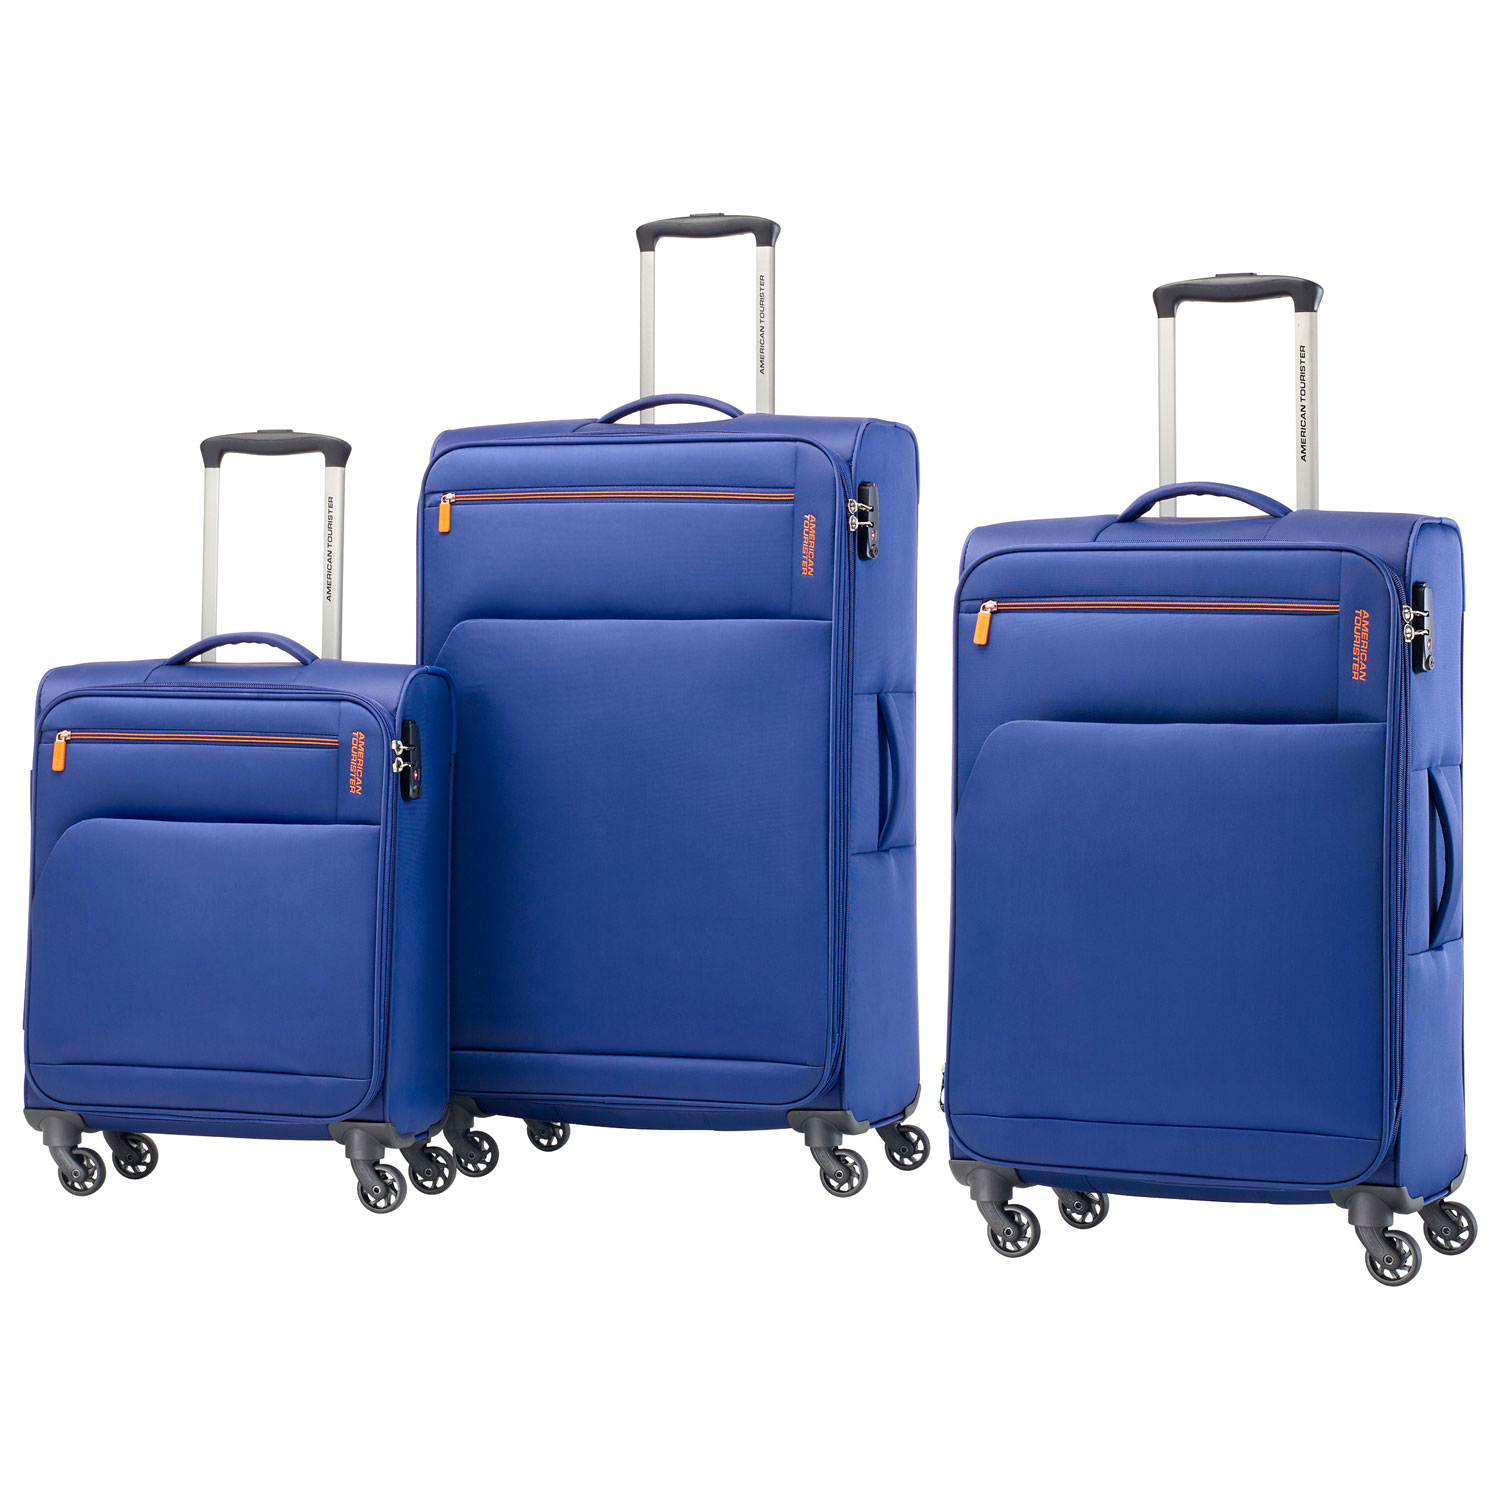 American Tourister Bayview NXT 3-Piece Soft Side Expandable Luggage Set - Imperial Blue